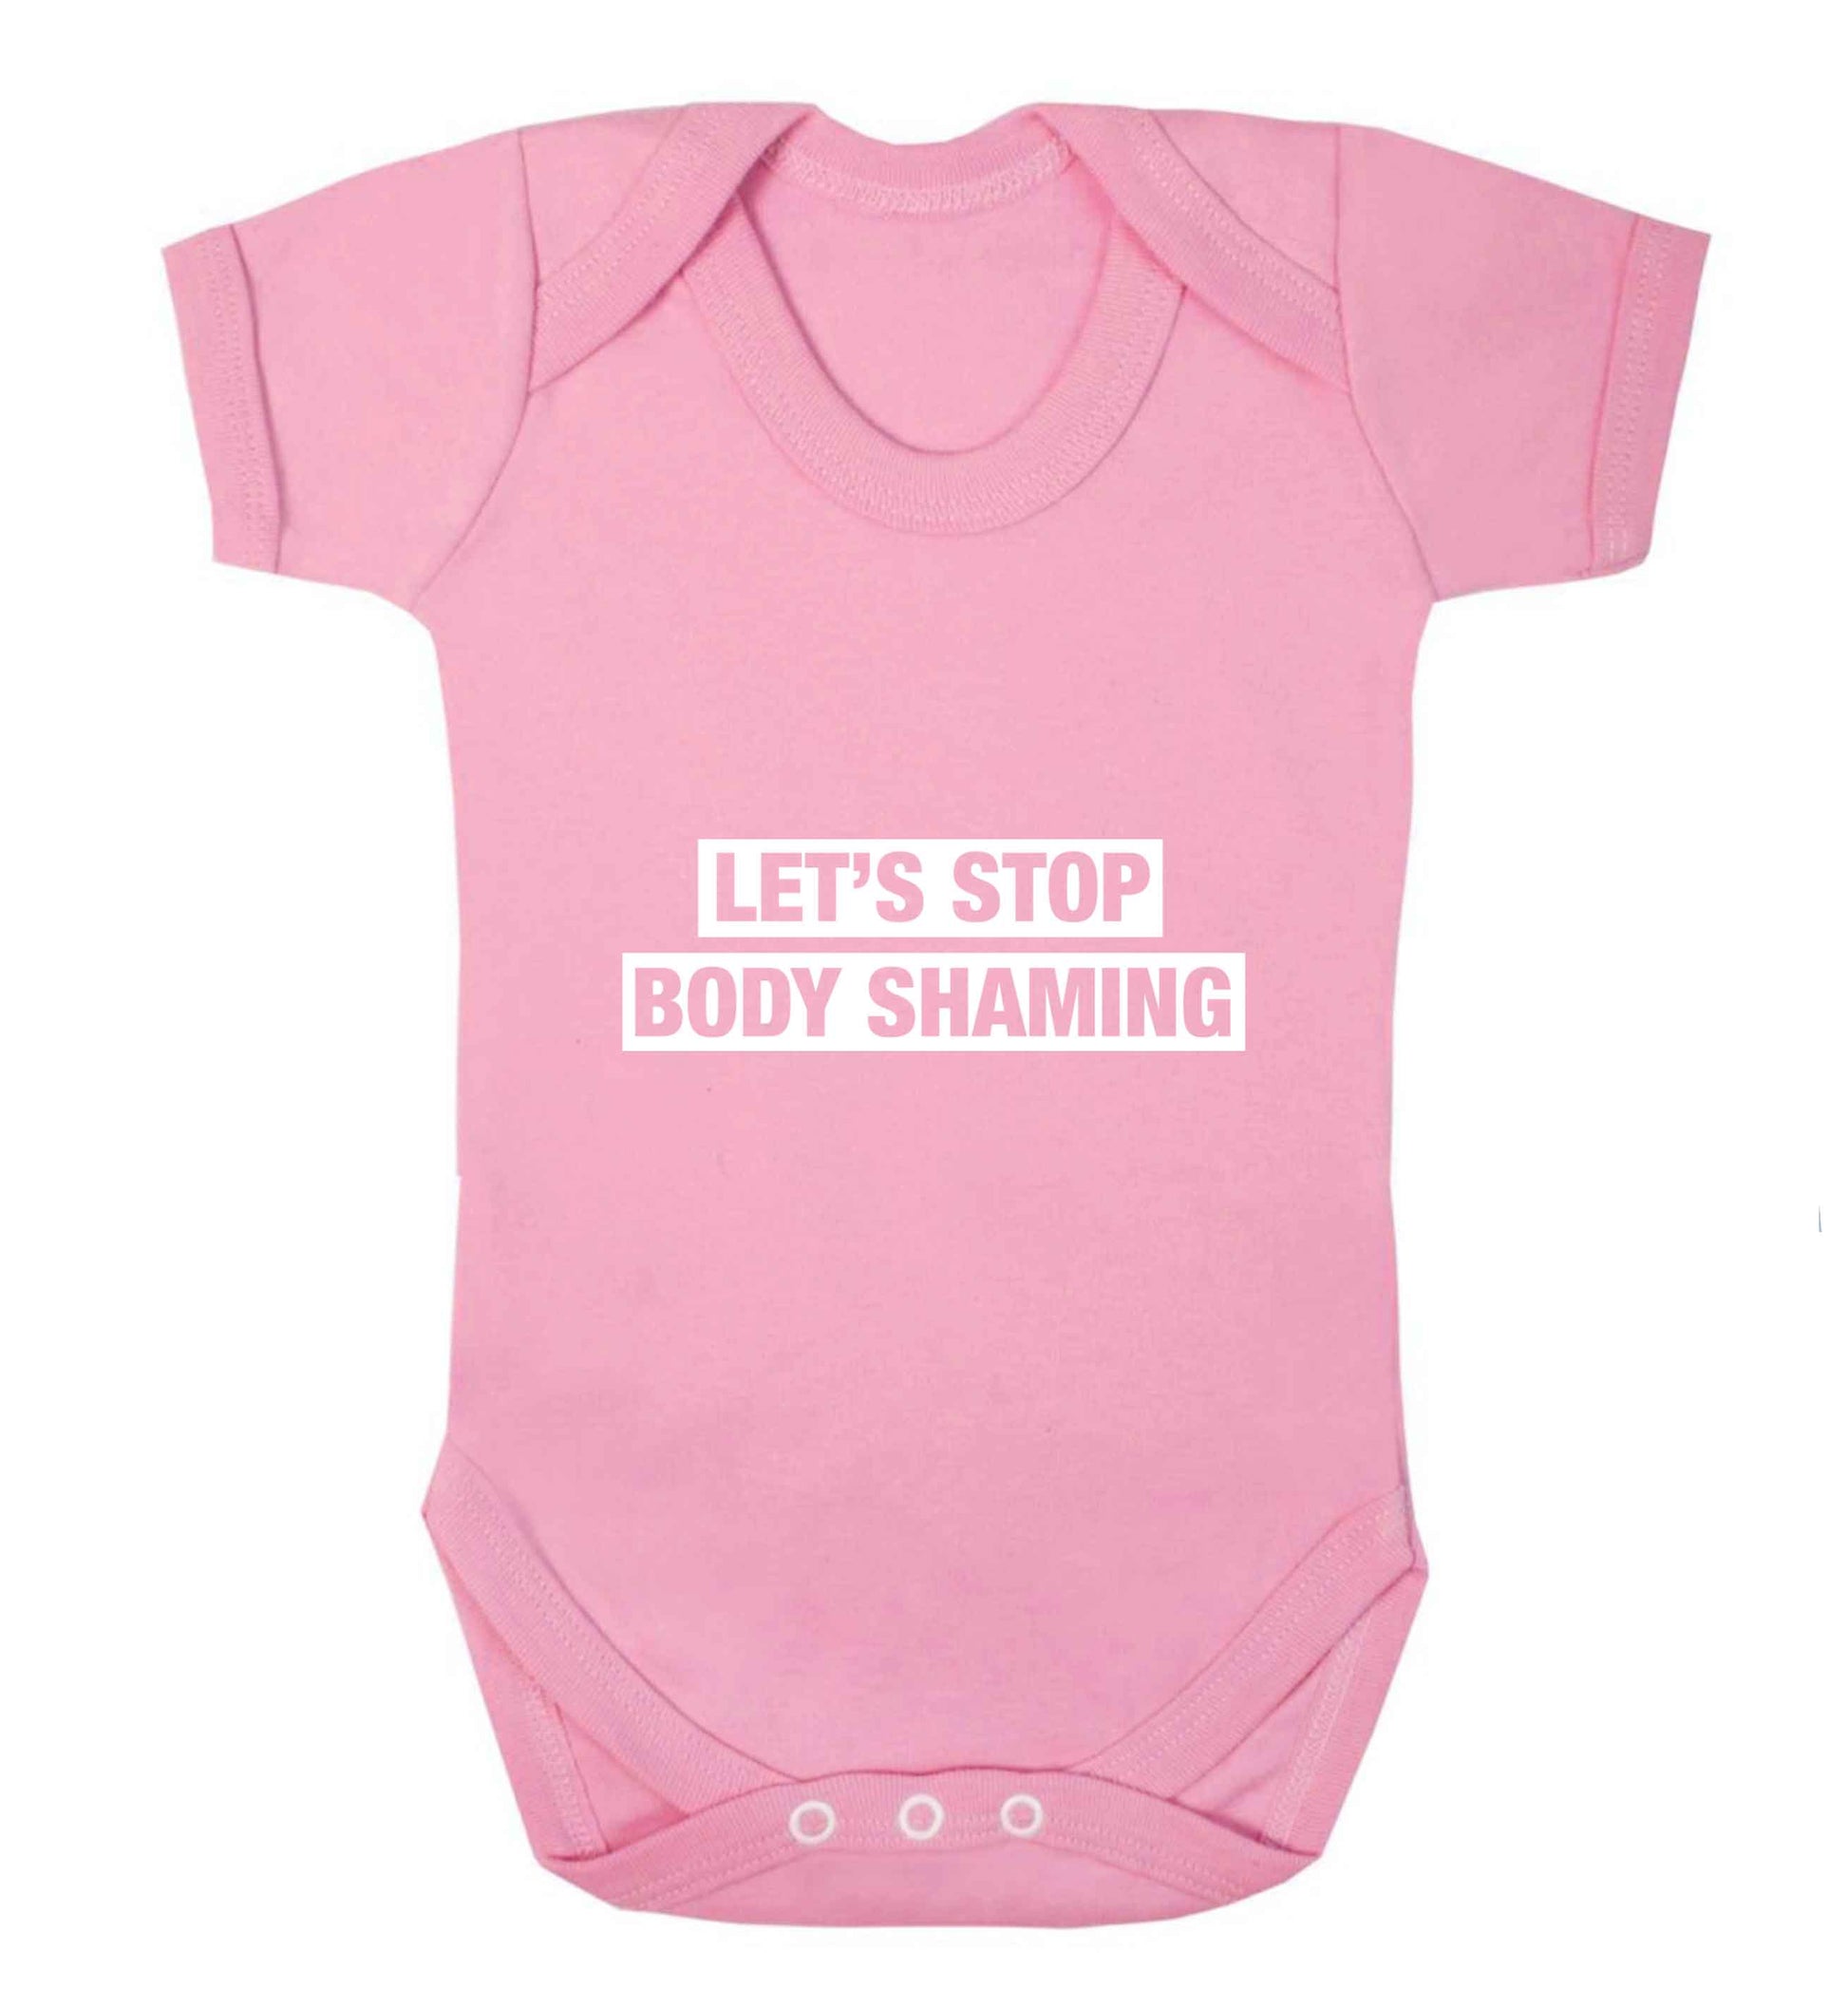 Let's stop body shaming baby vest pale pink 18-24 months